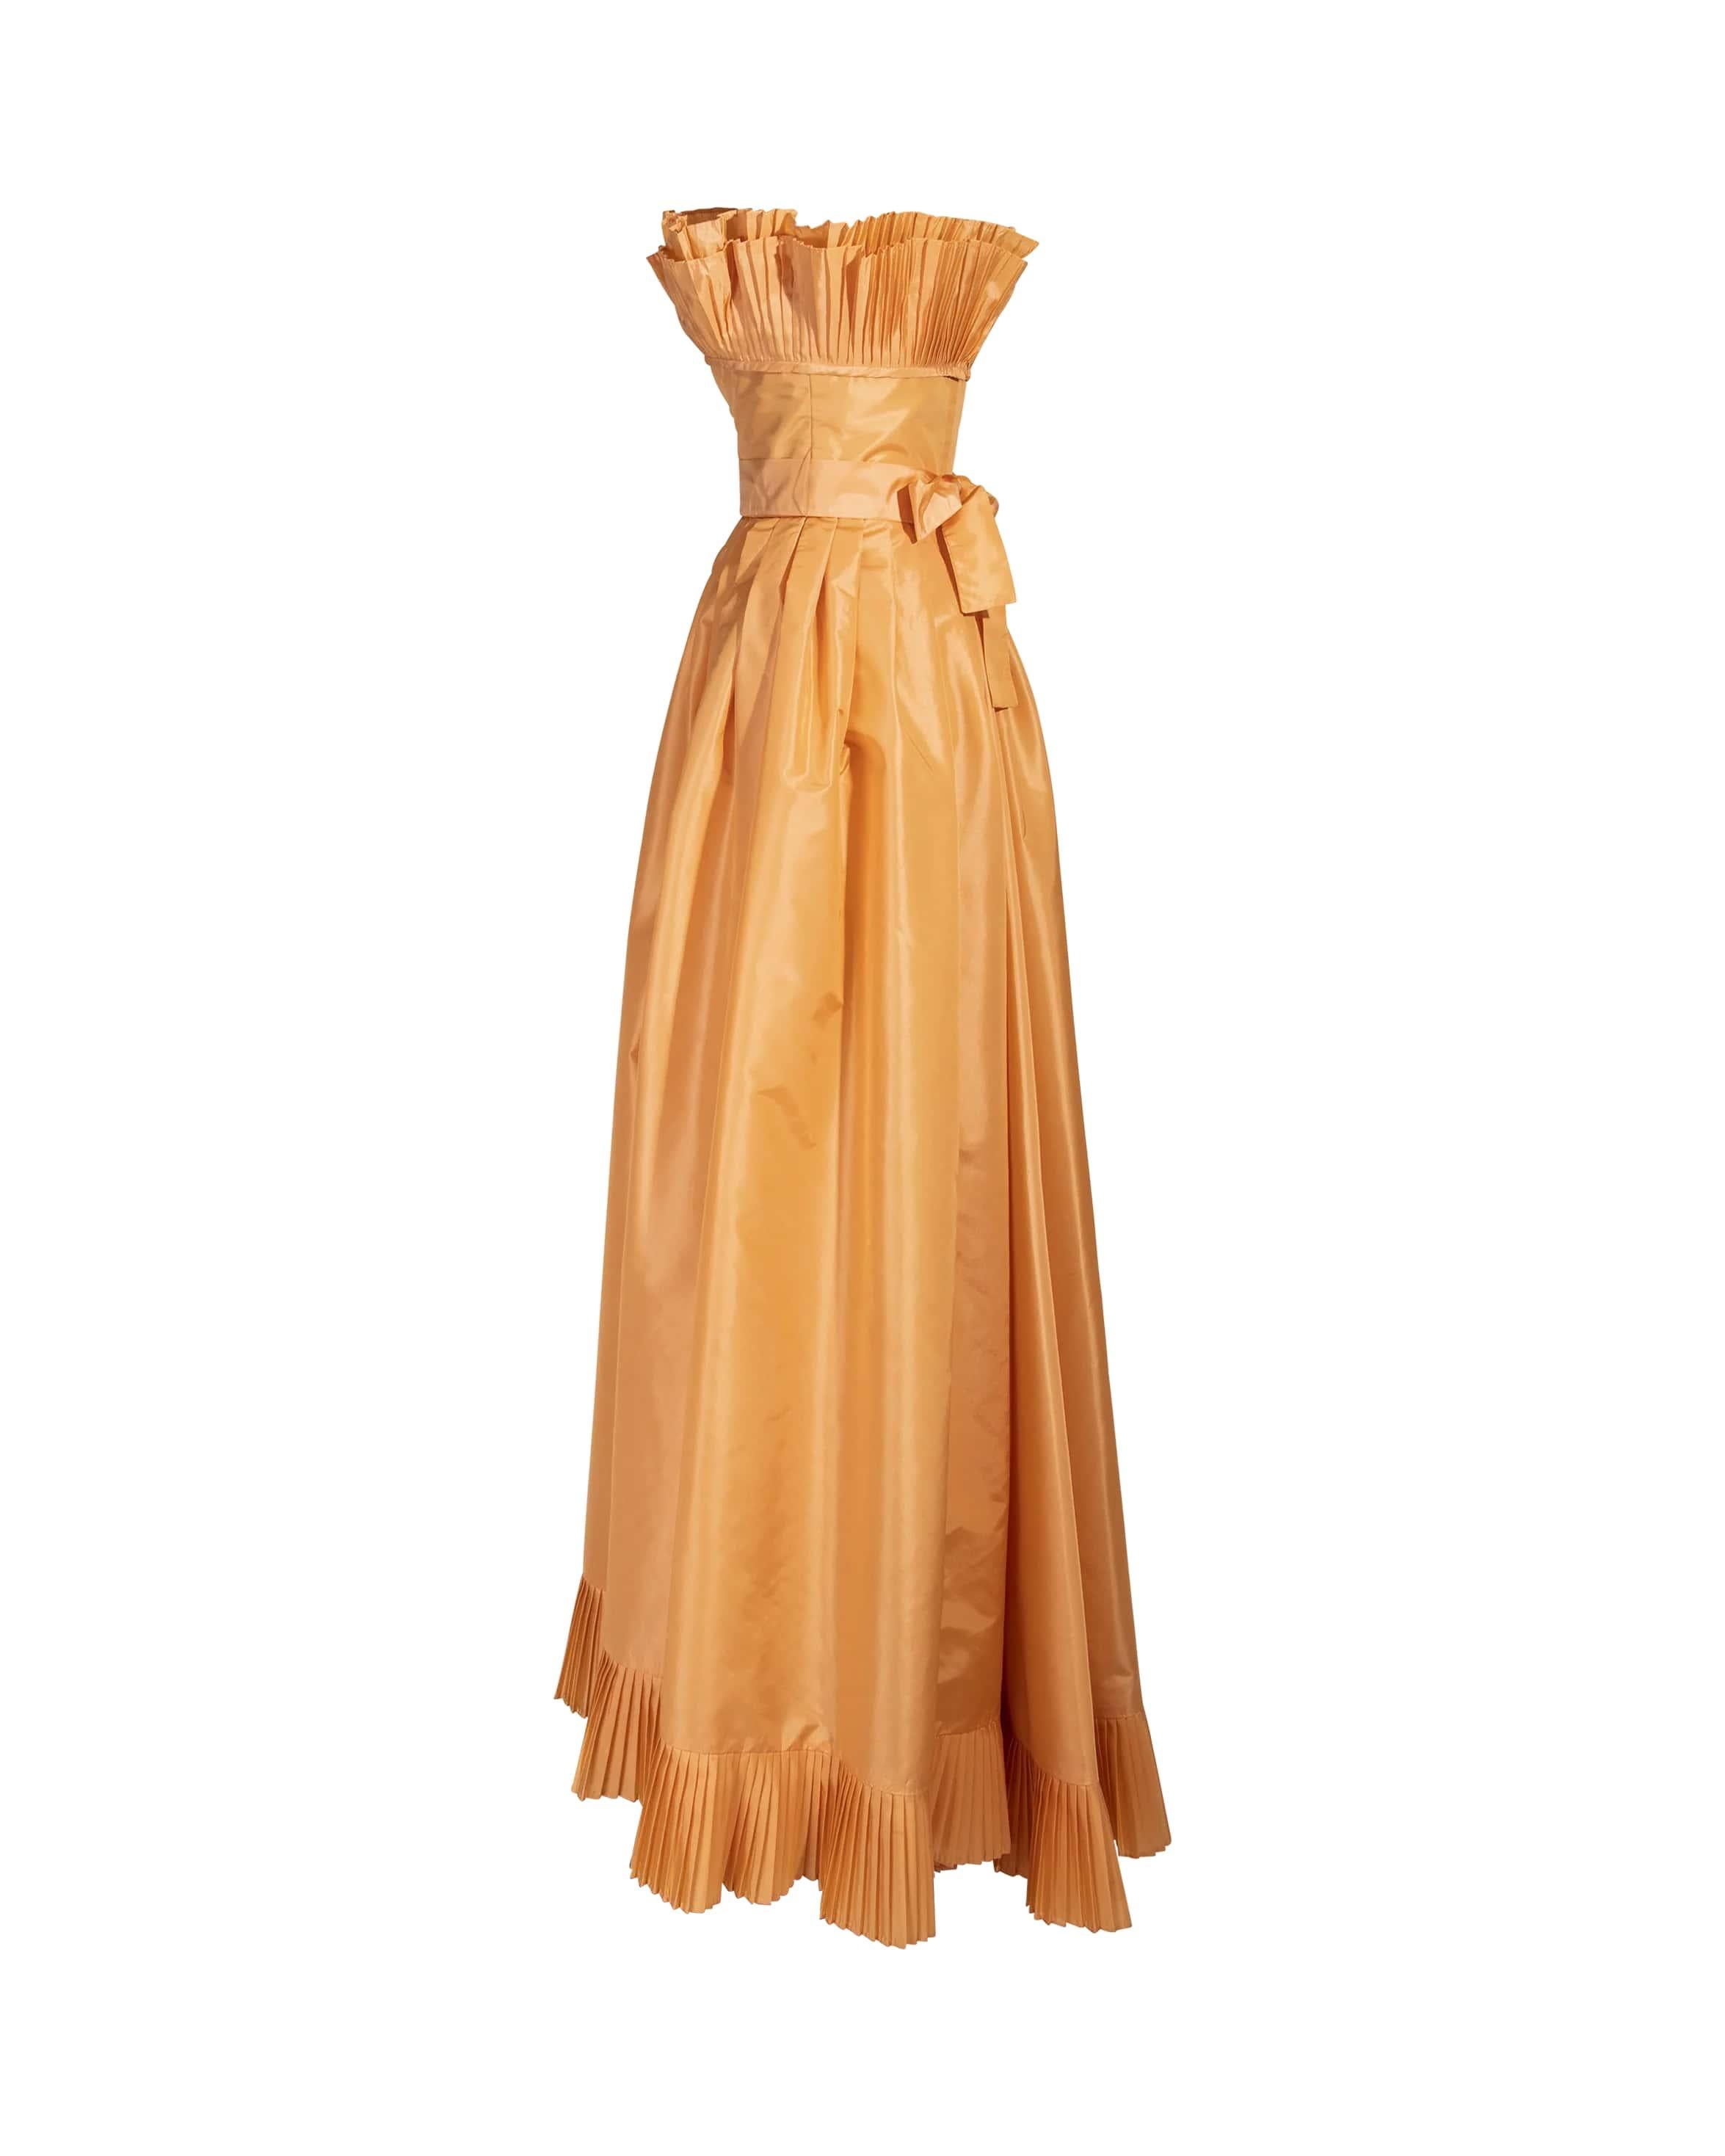 1970's Victor Costa orange iridescent taffeta strapless gown with ruffle trim. Fitted waist gown with built-in belt and ruffles at bust and hemline. Back zip closure. 